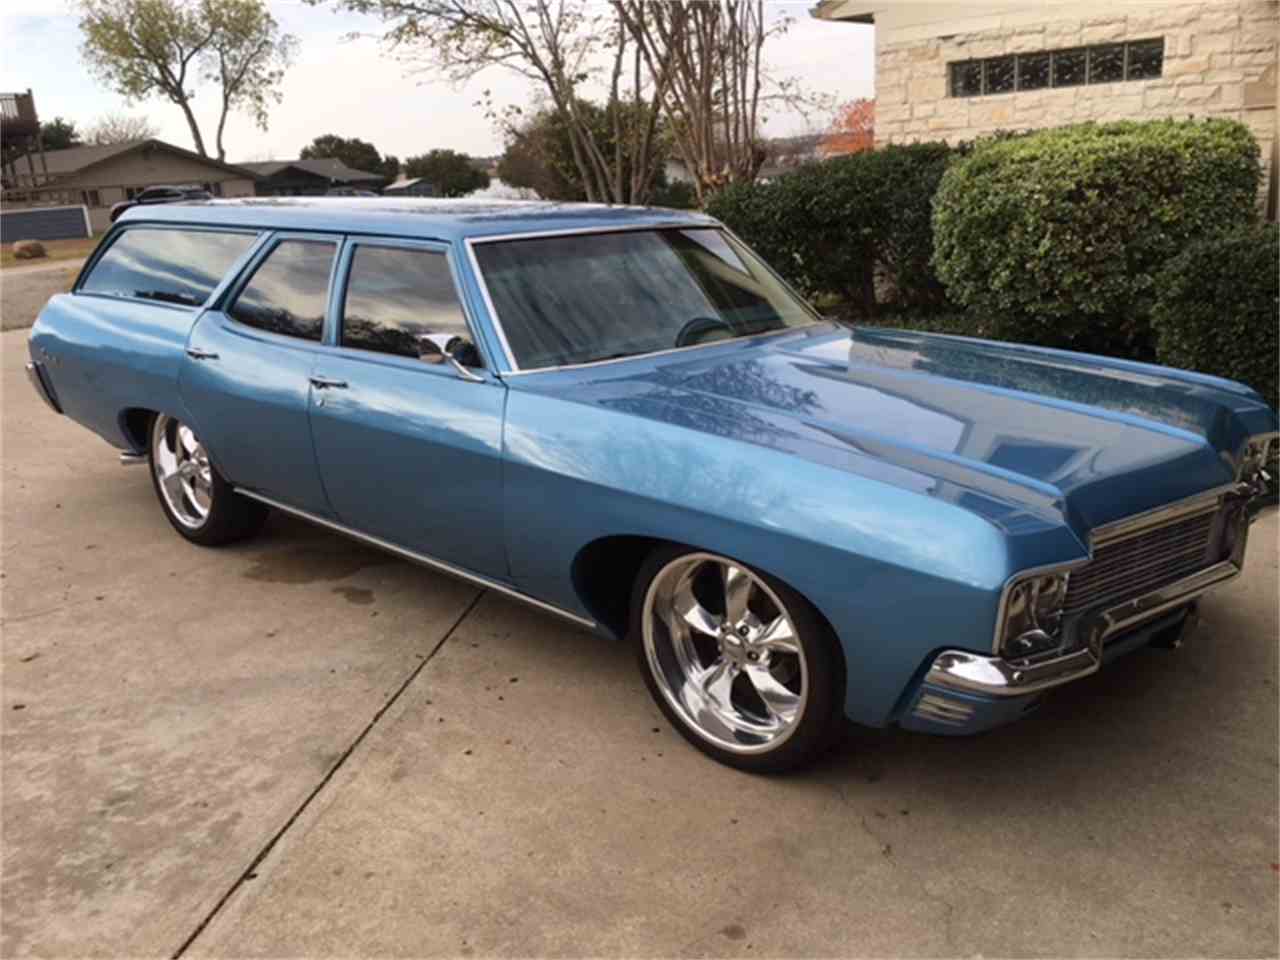 1970 Chevrolet Station Wagon for Sale | ClassicCars.com ...